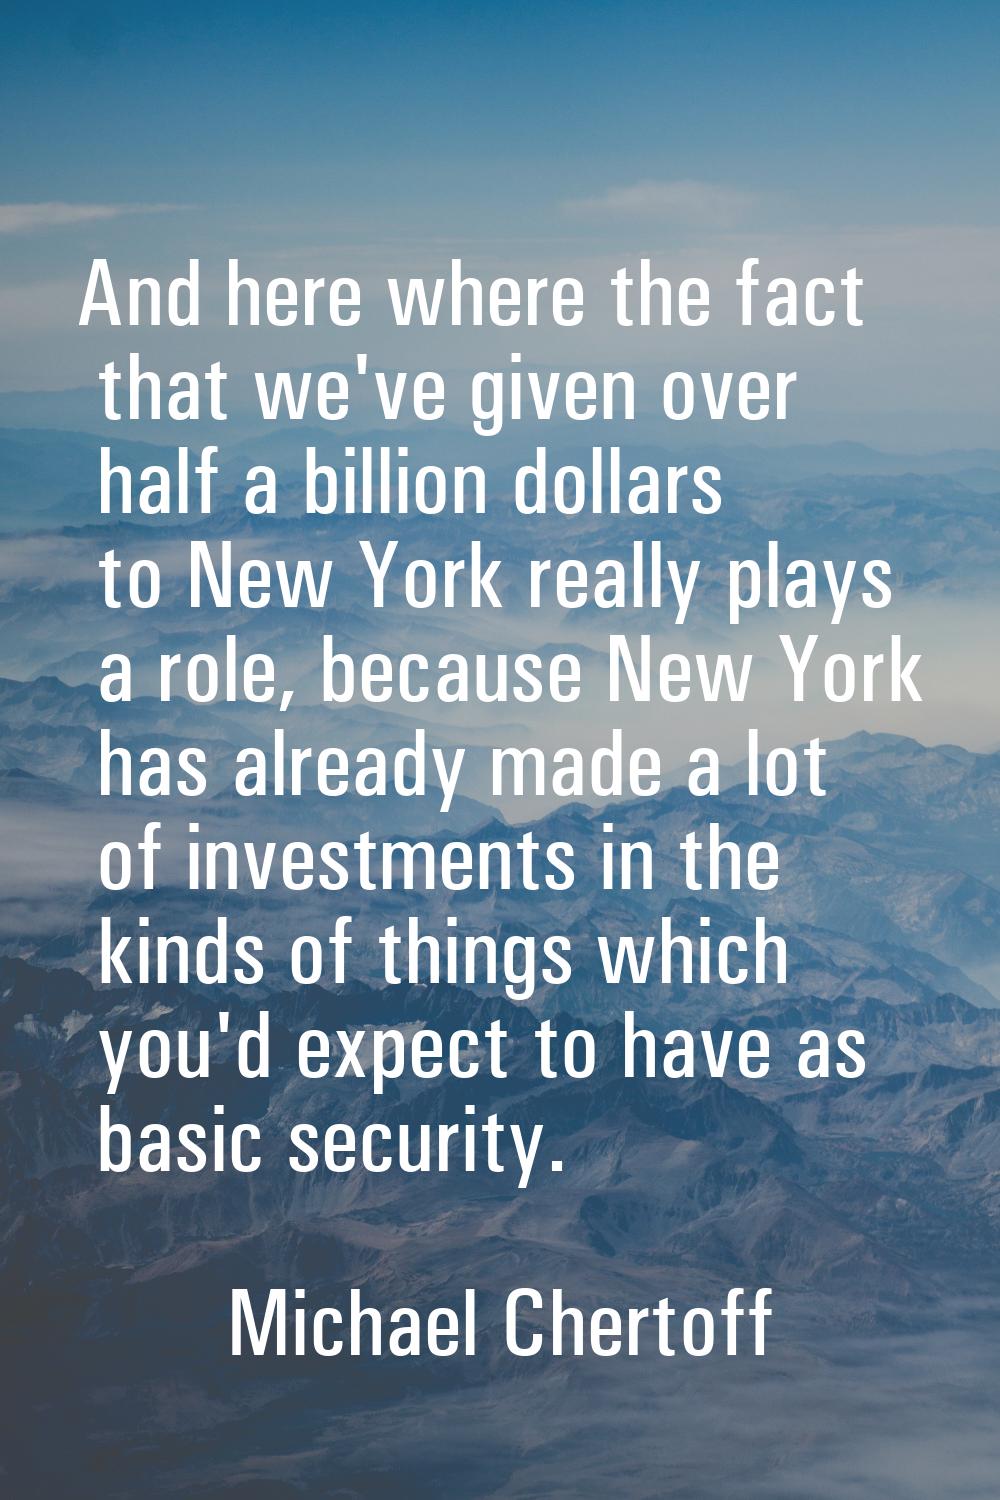 And here where the fact that we've given over half a billion dollars to New York really plays a rol